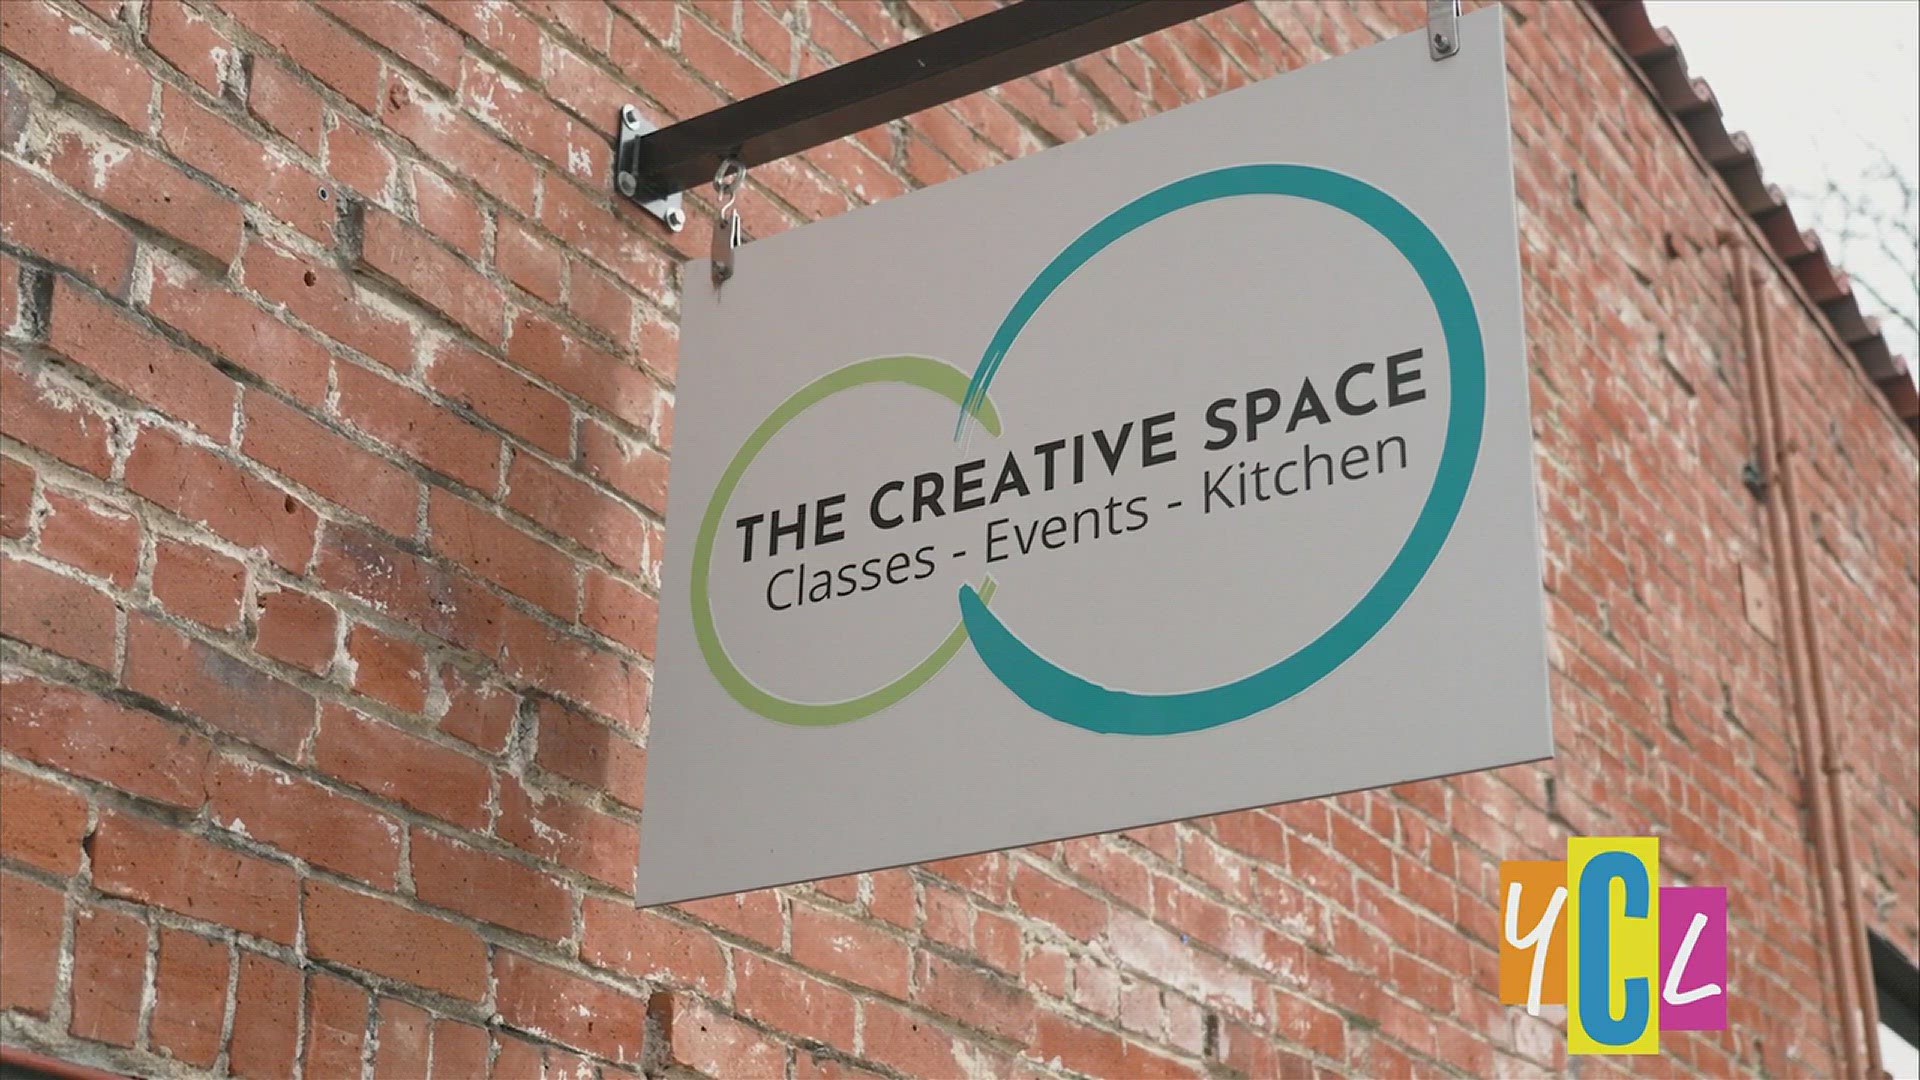 ABC10's Business of the Month is a place where small businesses can host pop-ups, private events, and creative classes. See how they're involved in the community!